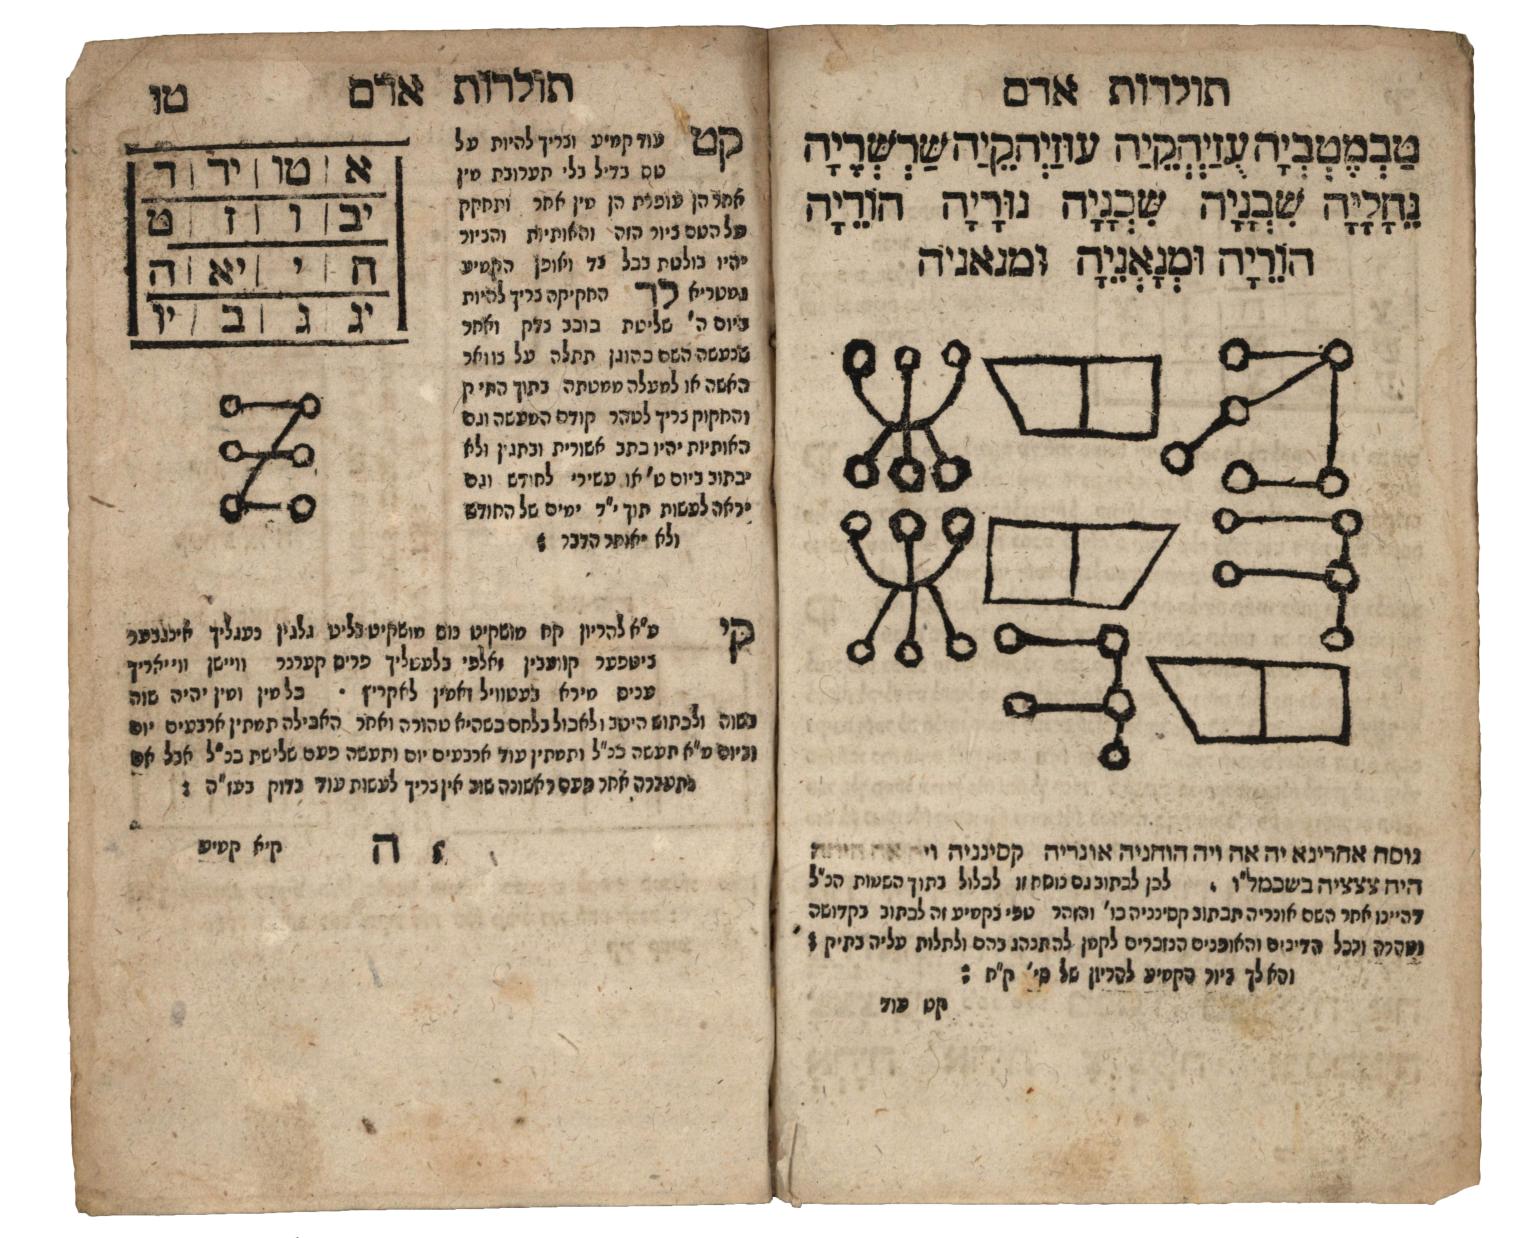 Facing-page Hebrew manuscript with charts with Hebrew letters on left side, and geometric drawings on right side. 